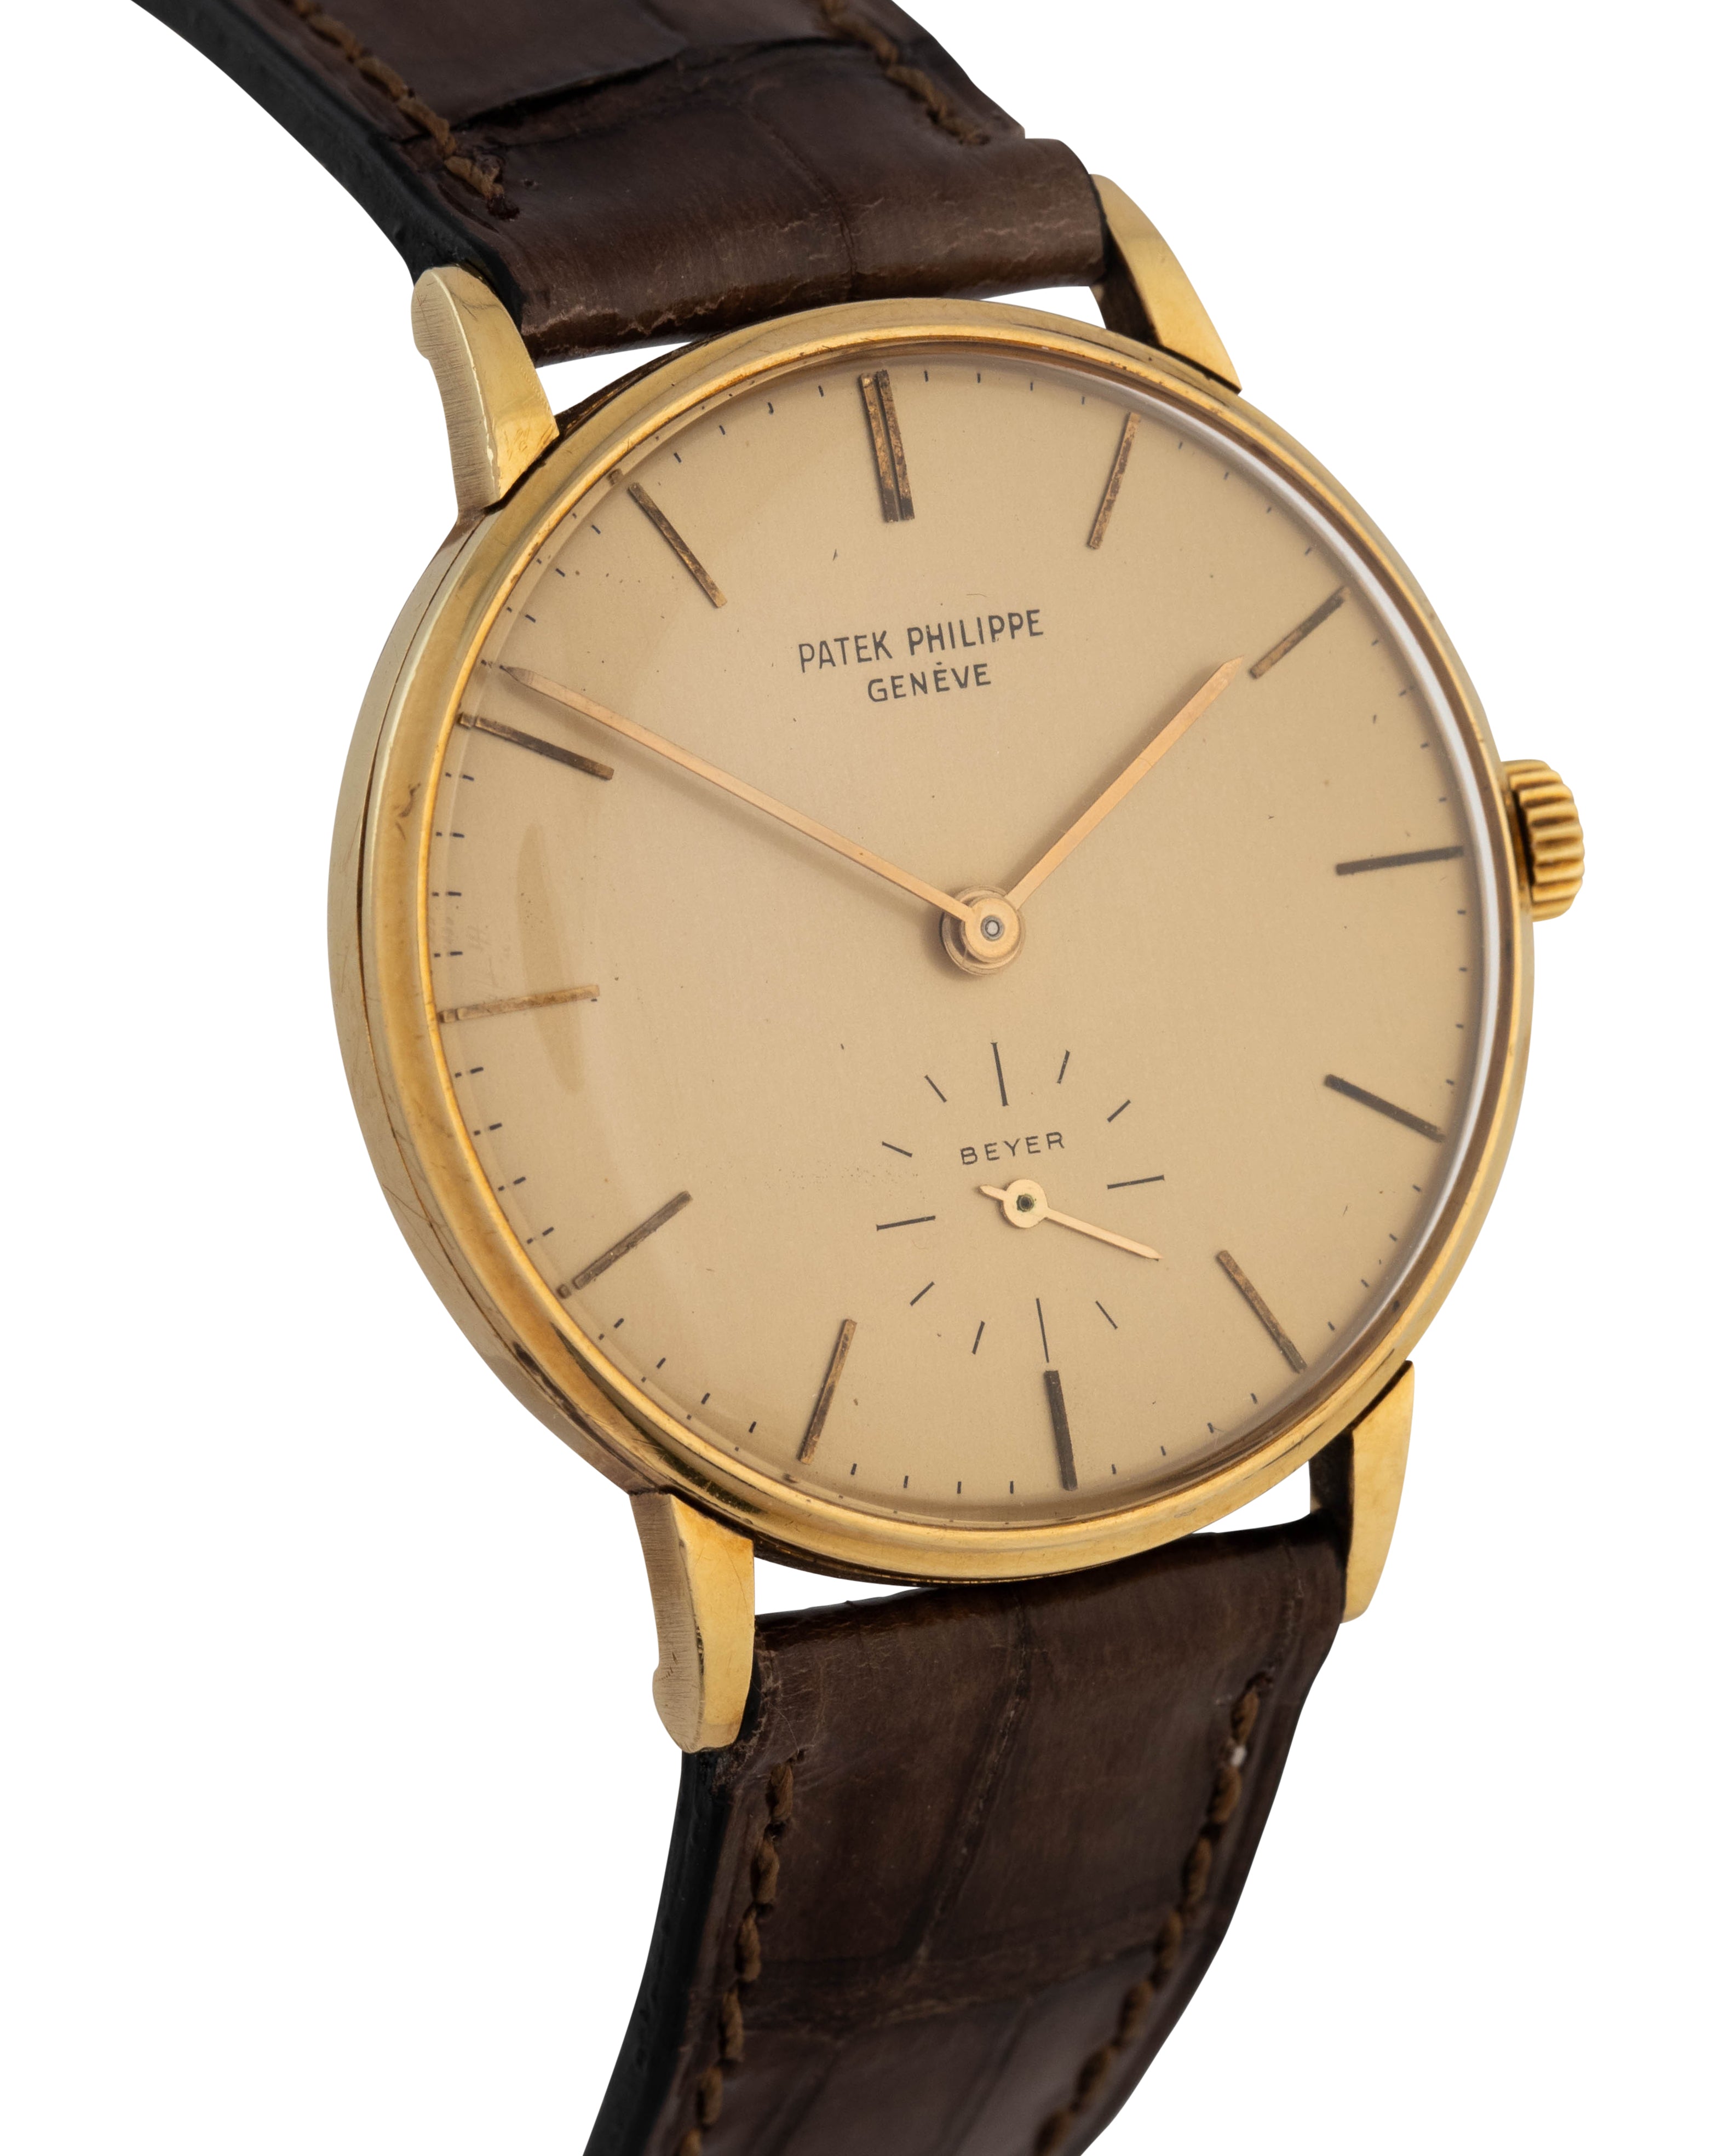 Patek Philippe Ref. 3410 Calatrava in yellow gold with double signed "Beyer" dial 